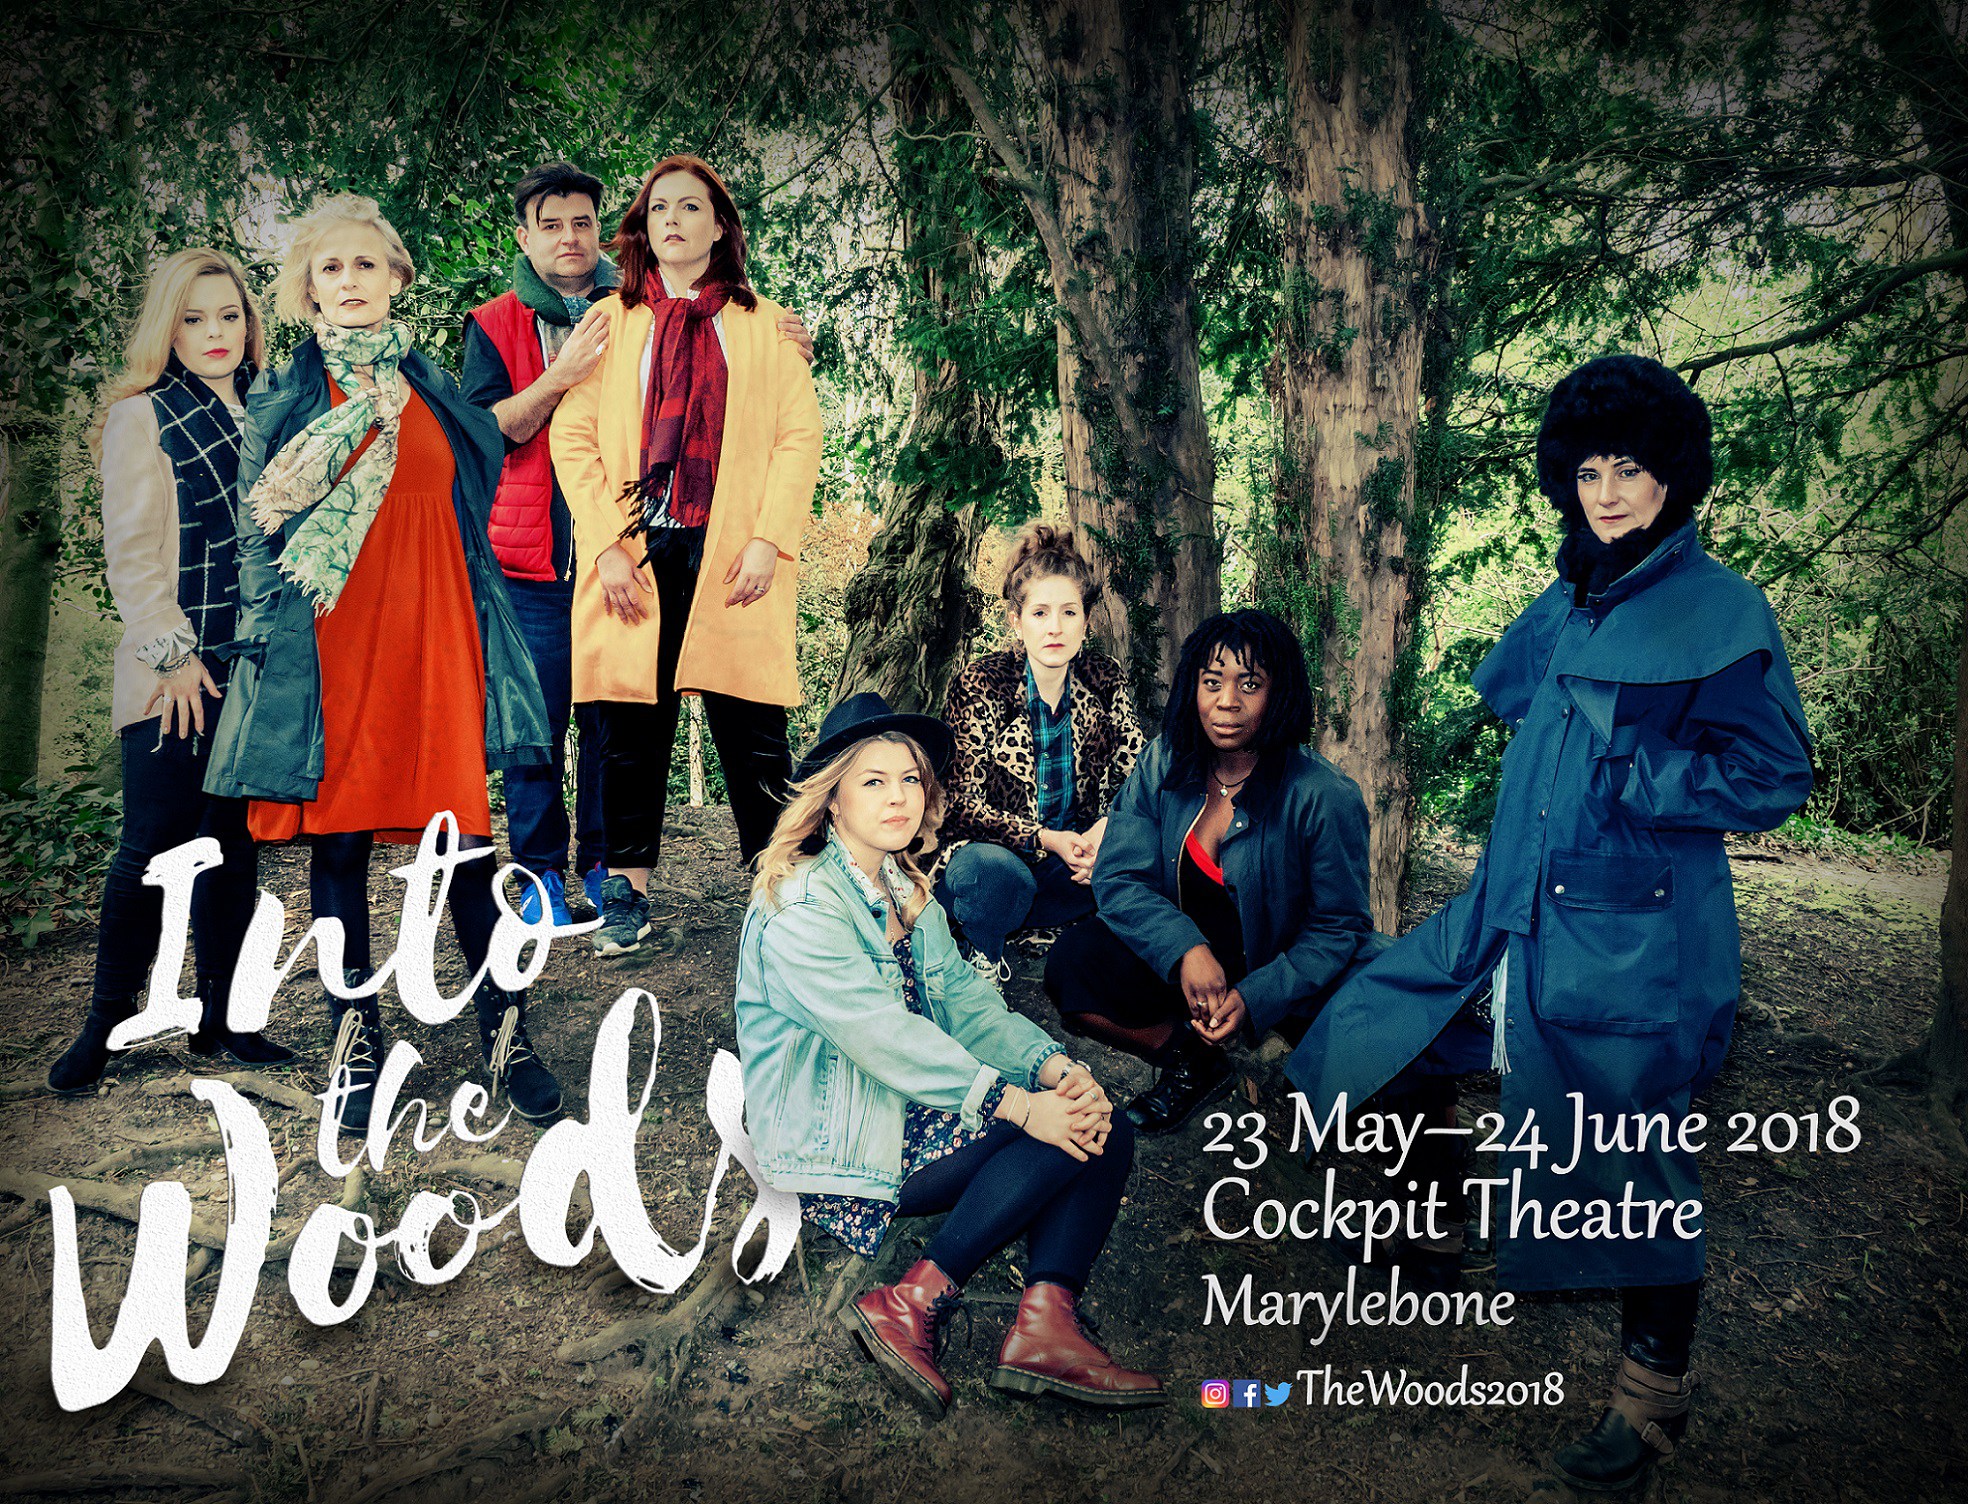 NEWS: Casting Announced for Into the Woods at The Cockpit